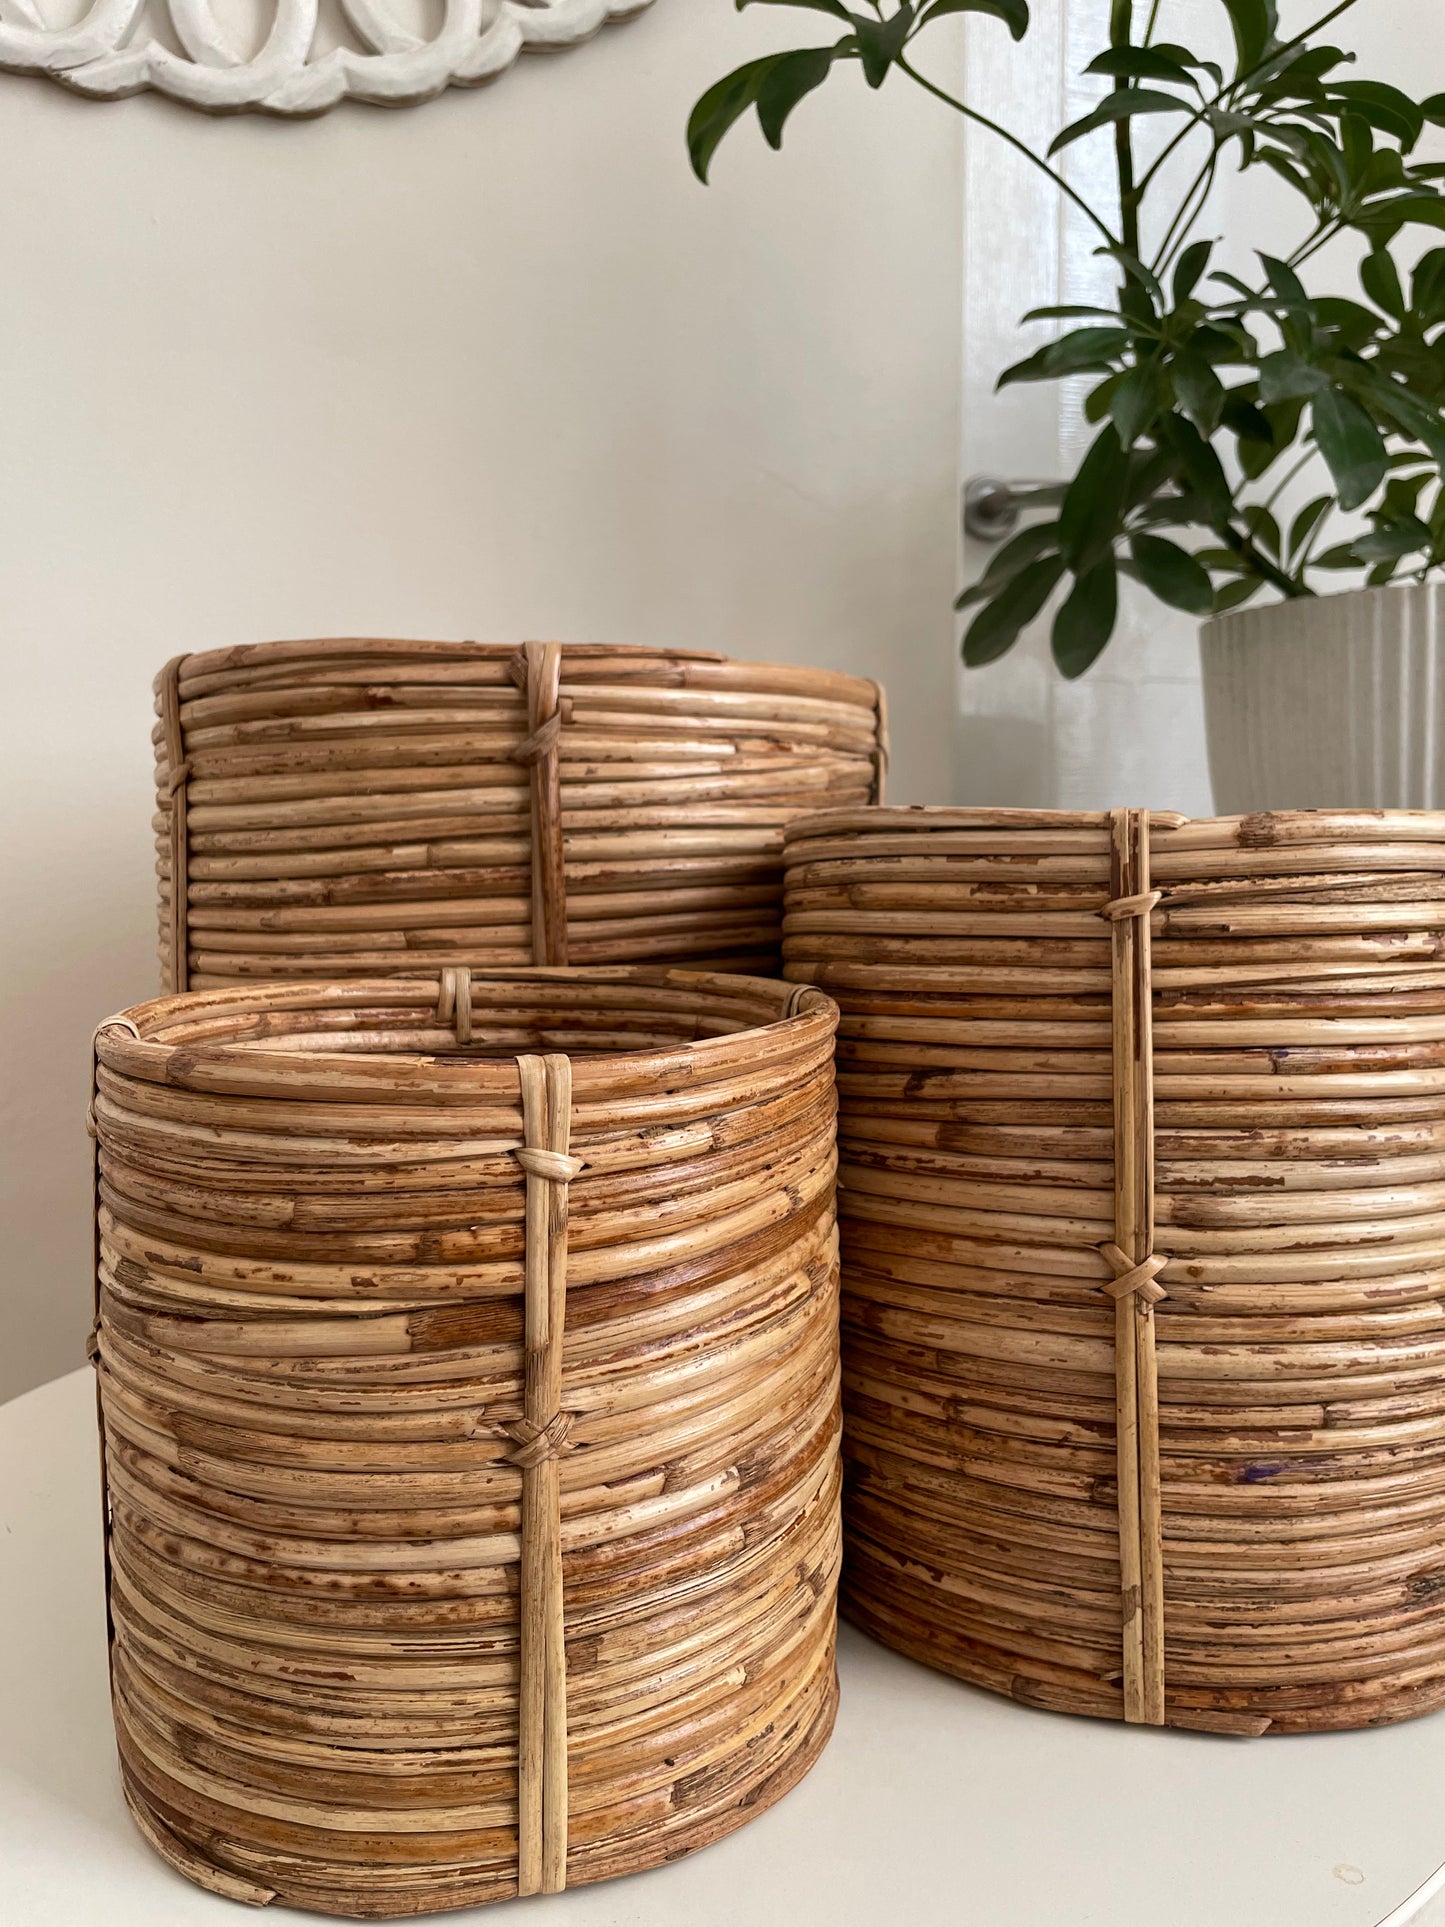 Coiled Cane Planter/ Storage ︳Large